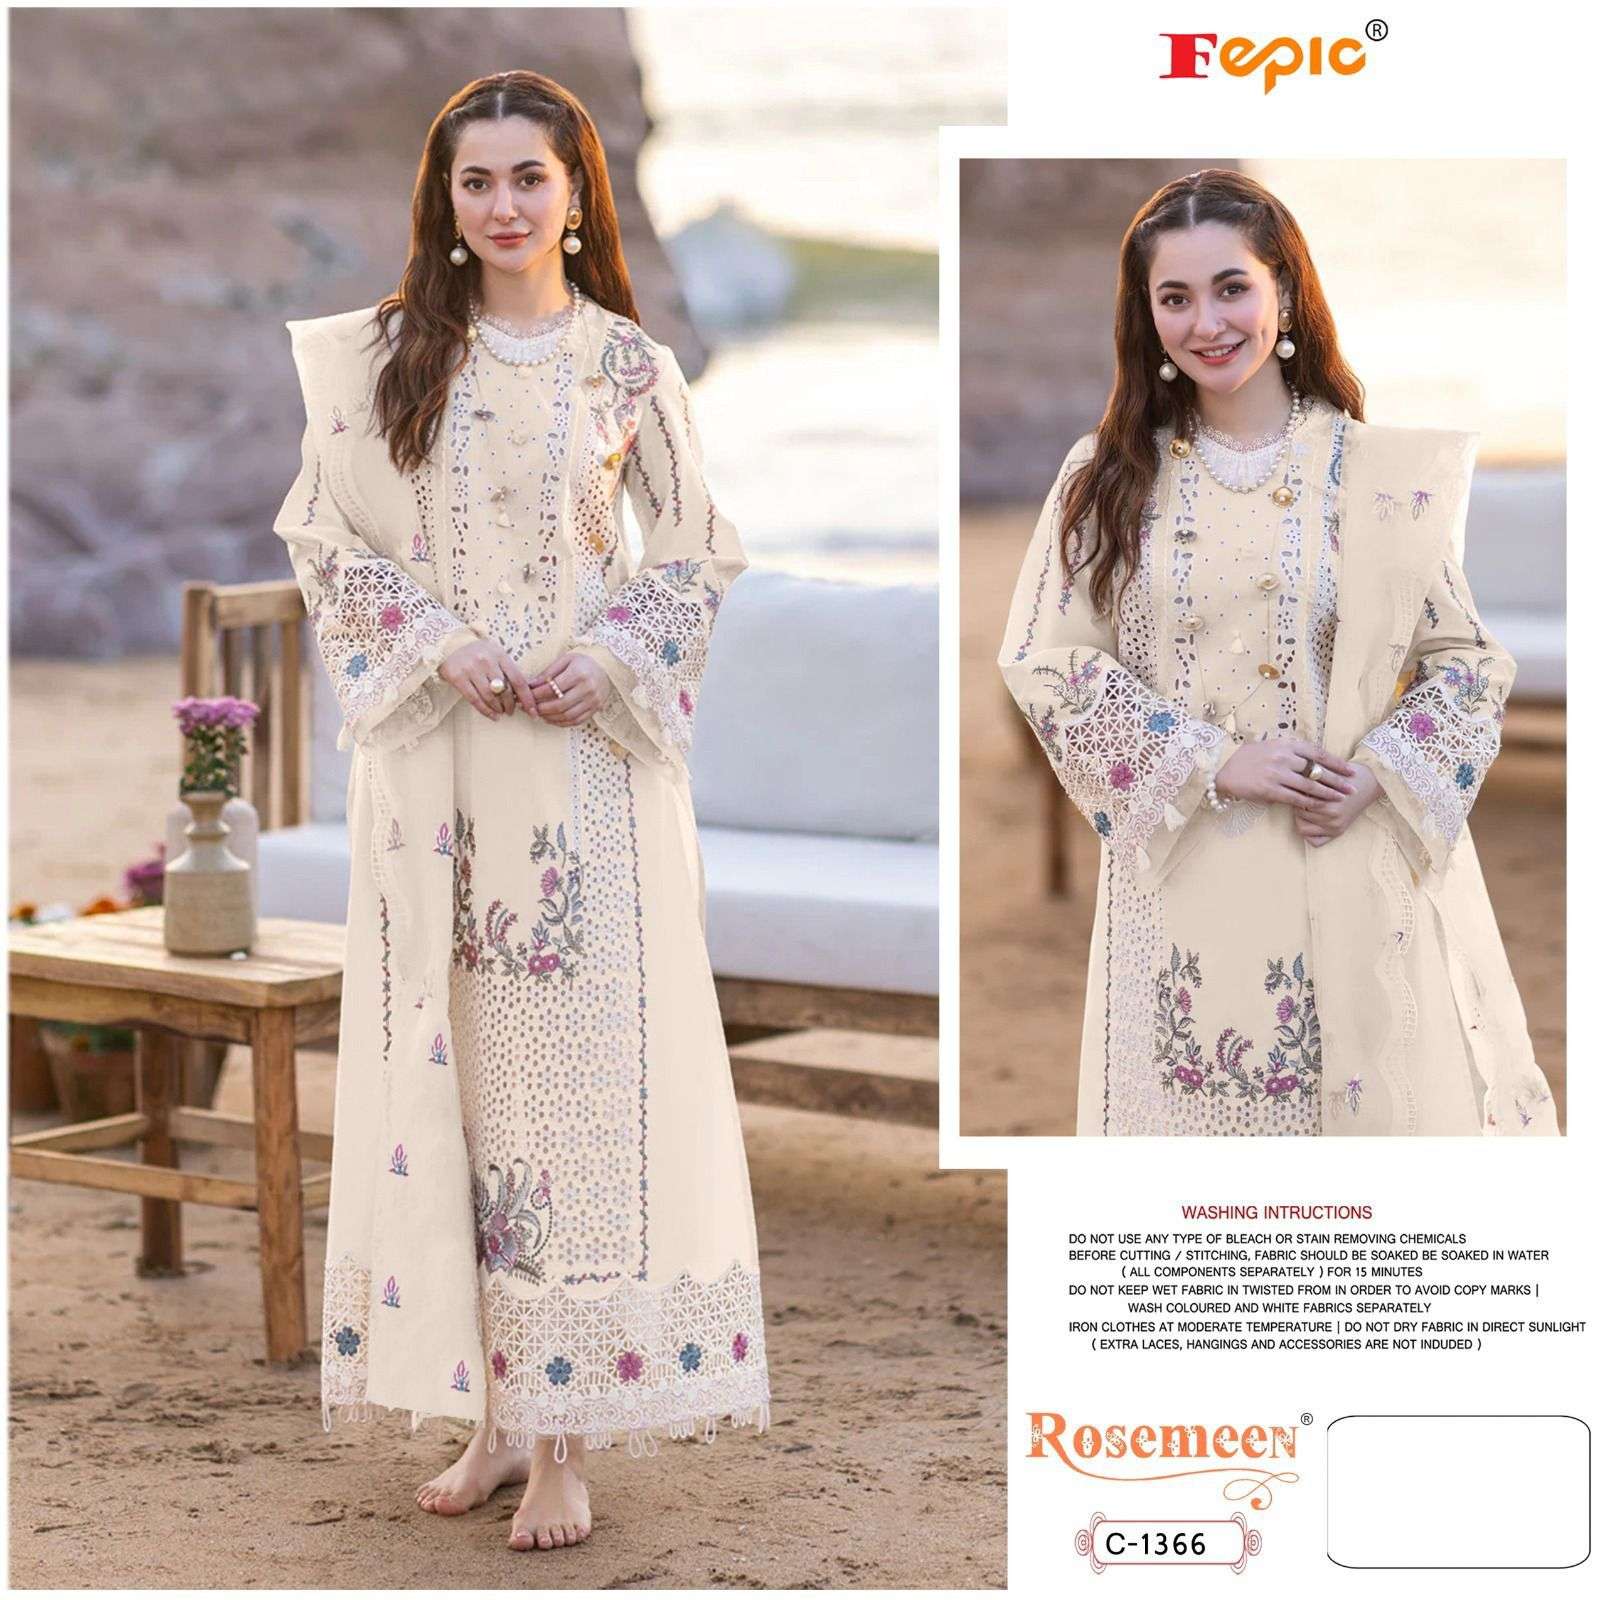 ROSEMEEN C-1366 COLOURS BY FEPIC DESIGNER COTTON EMBROIDERY DRESSES